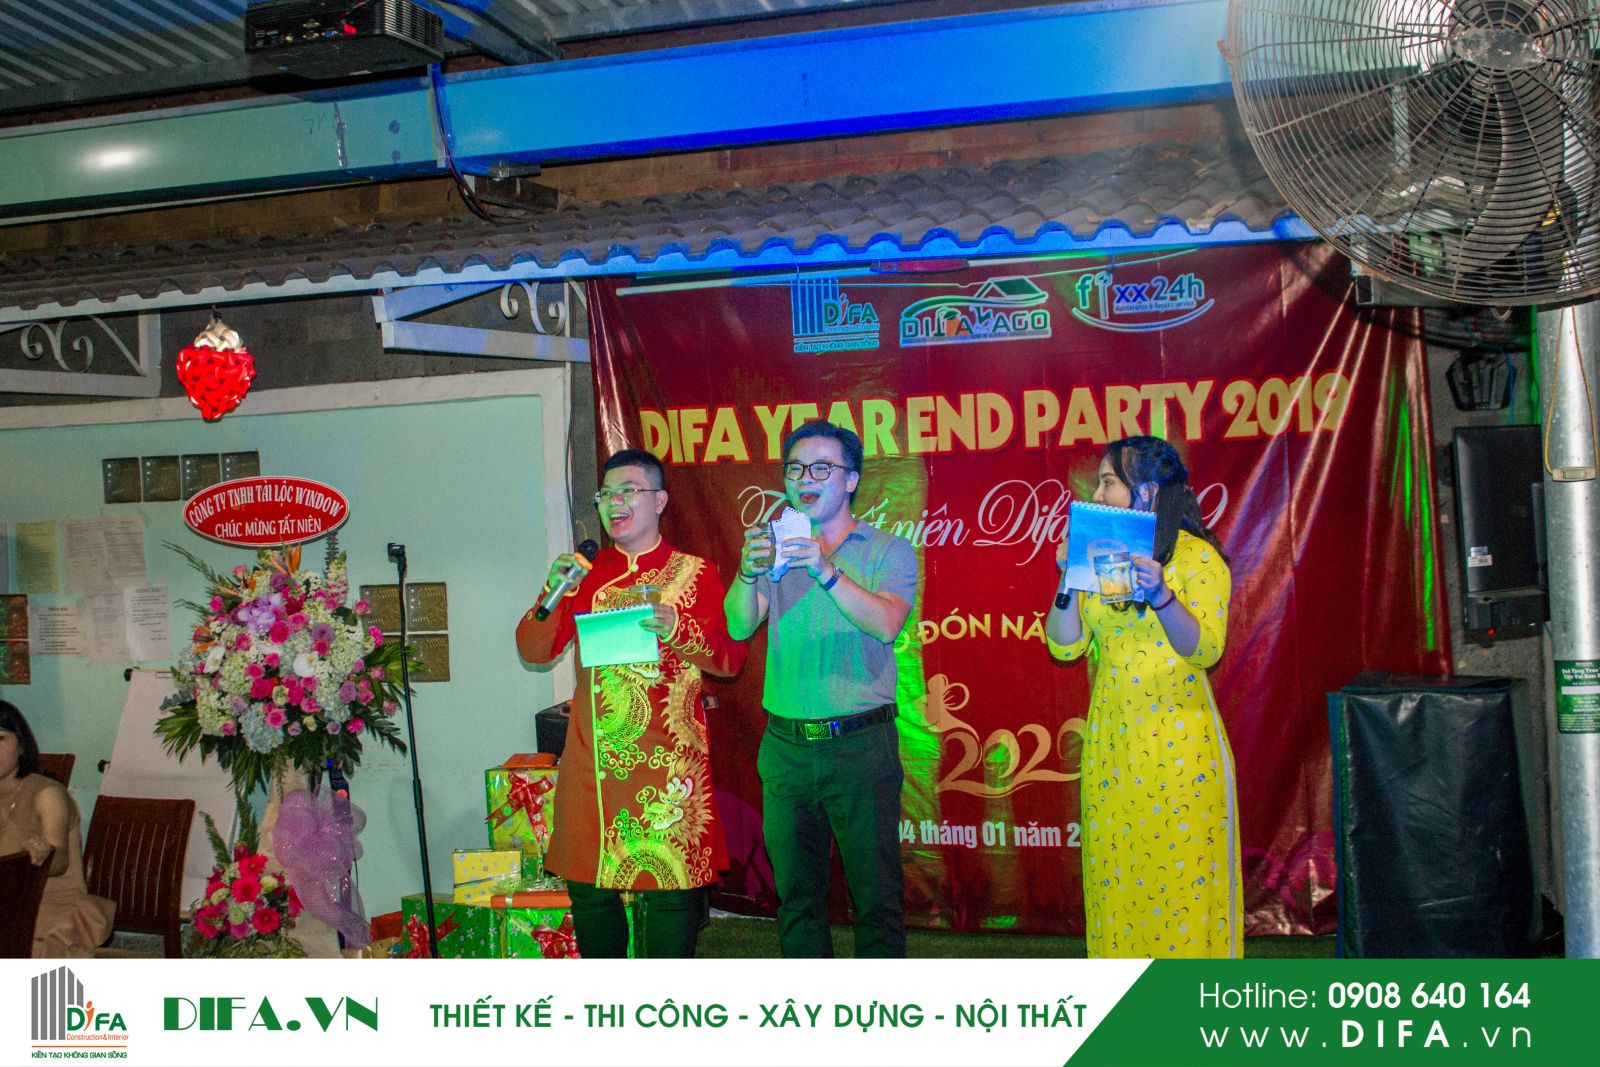 DIFA YEAR END PARTY 2019 | Diệp Gia